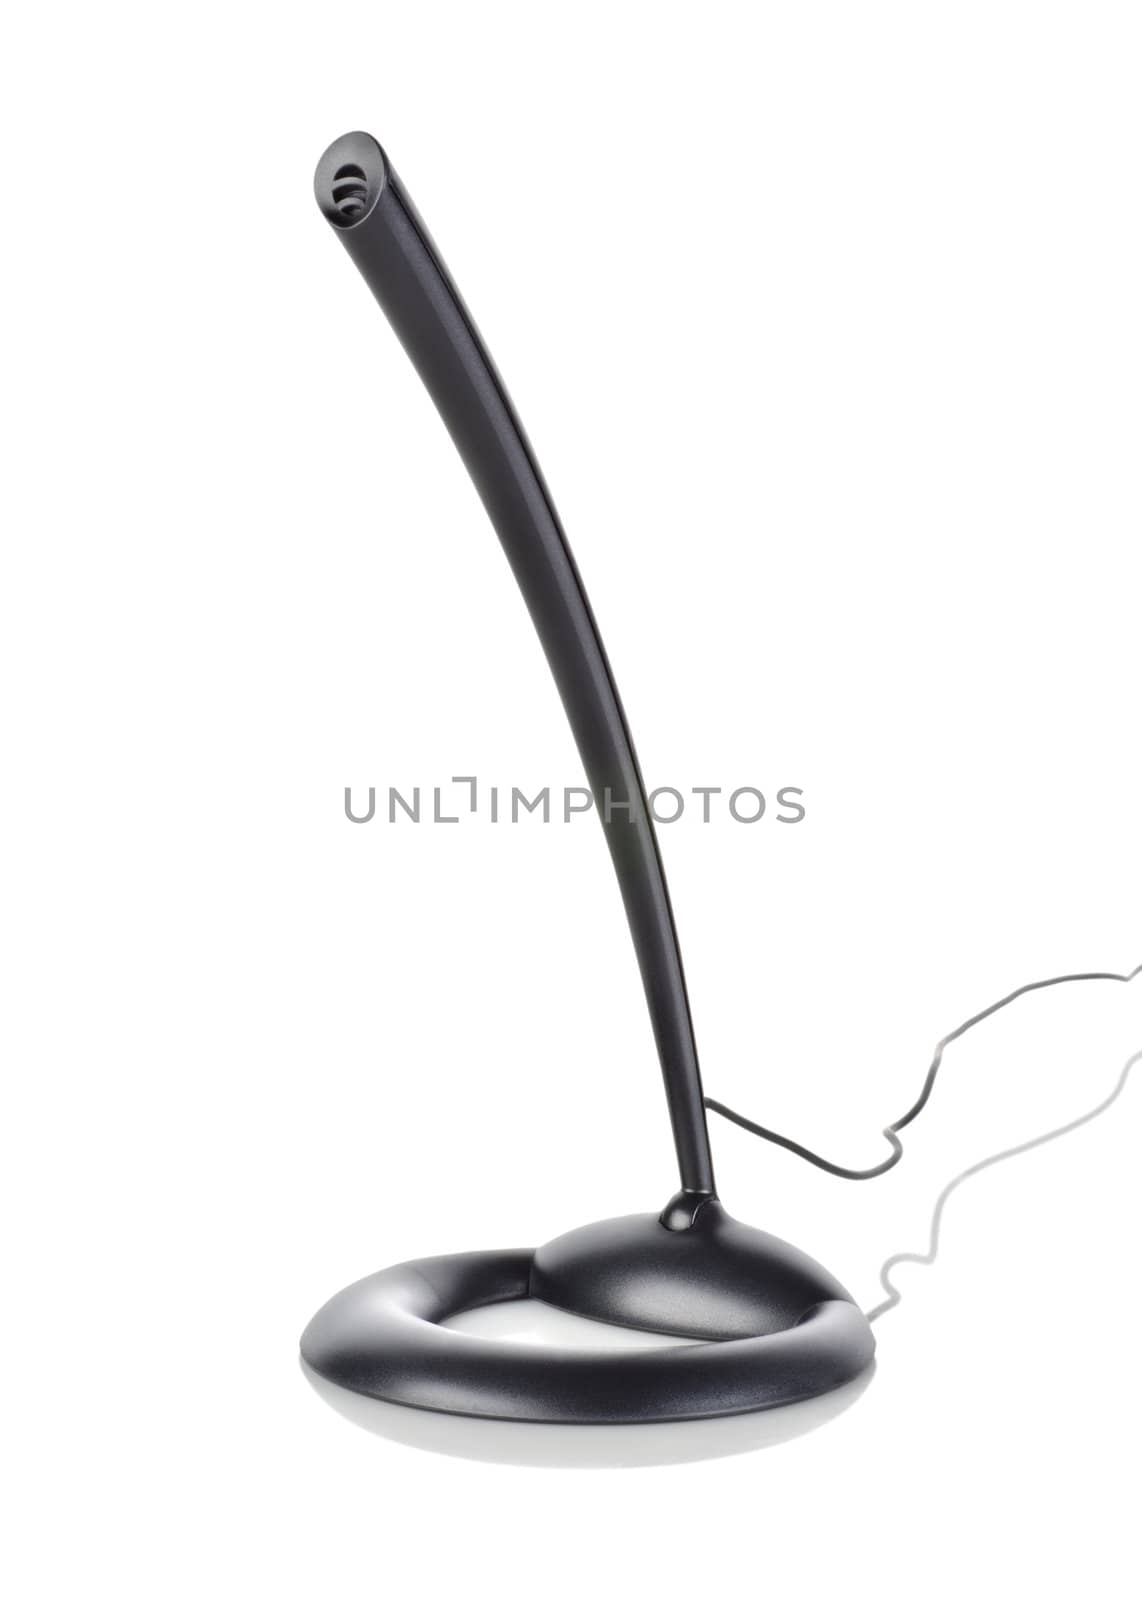 Black microphone isolated on a white background